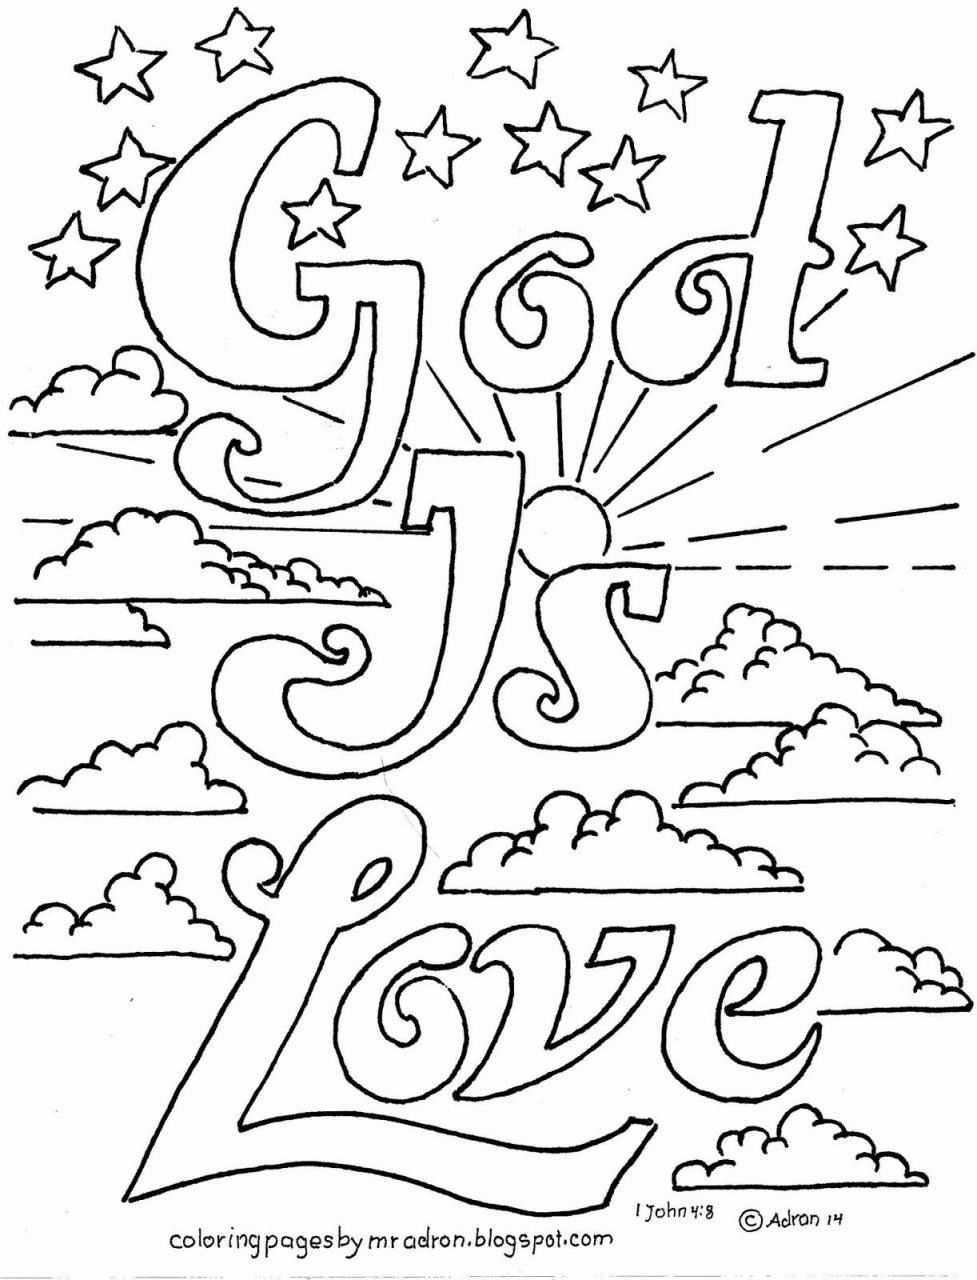 Children's Church Coloring Pages